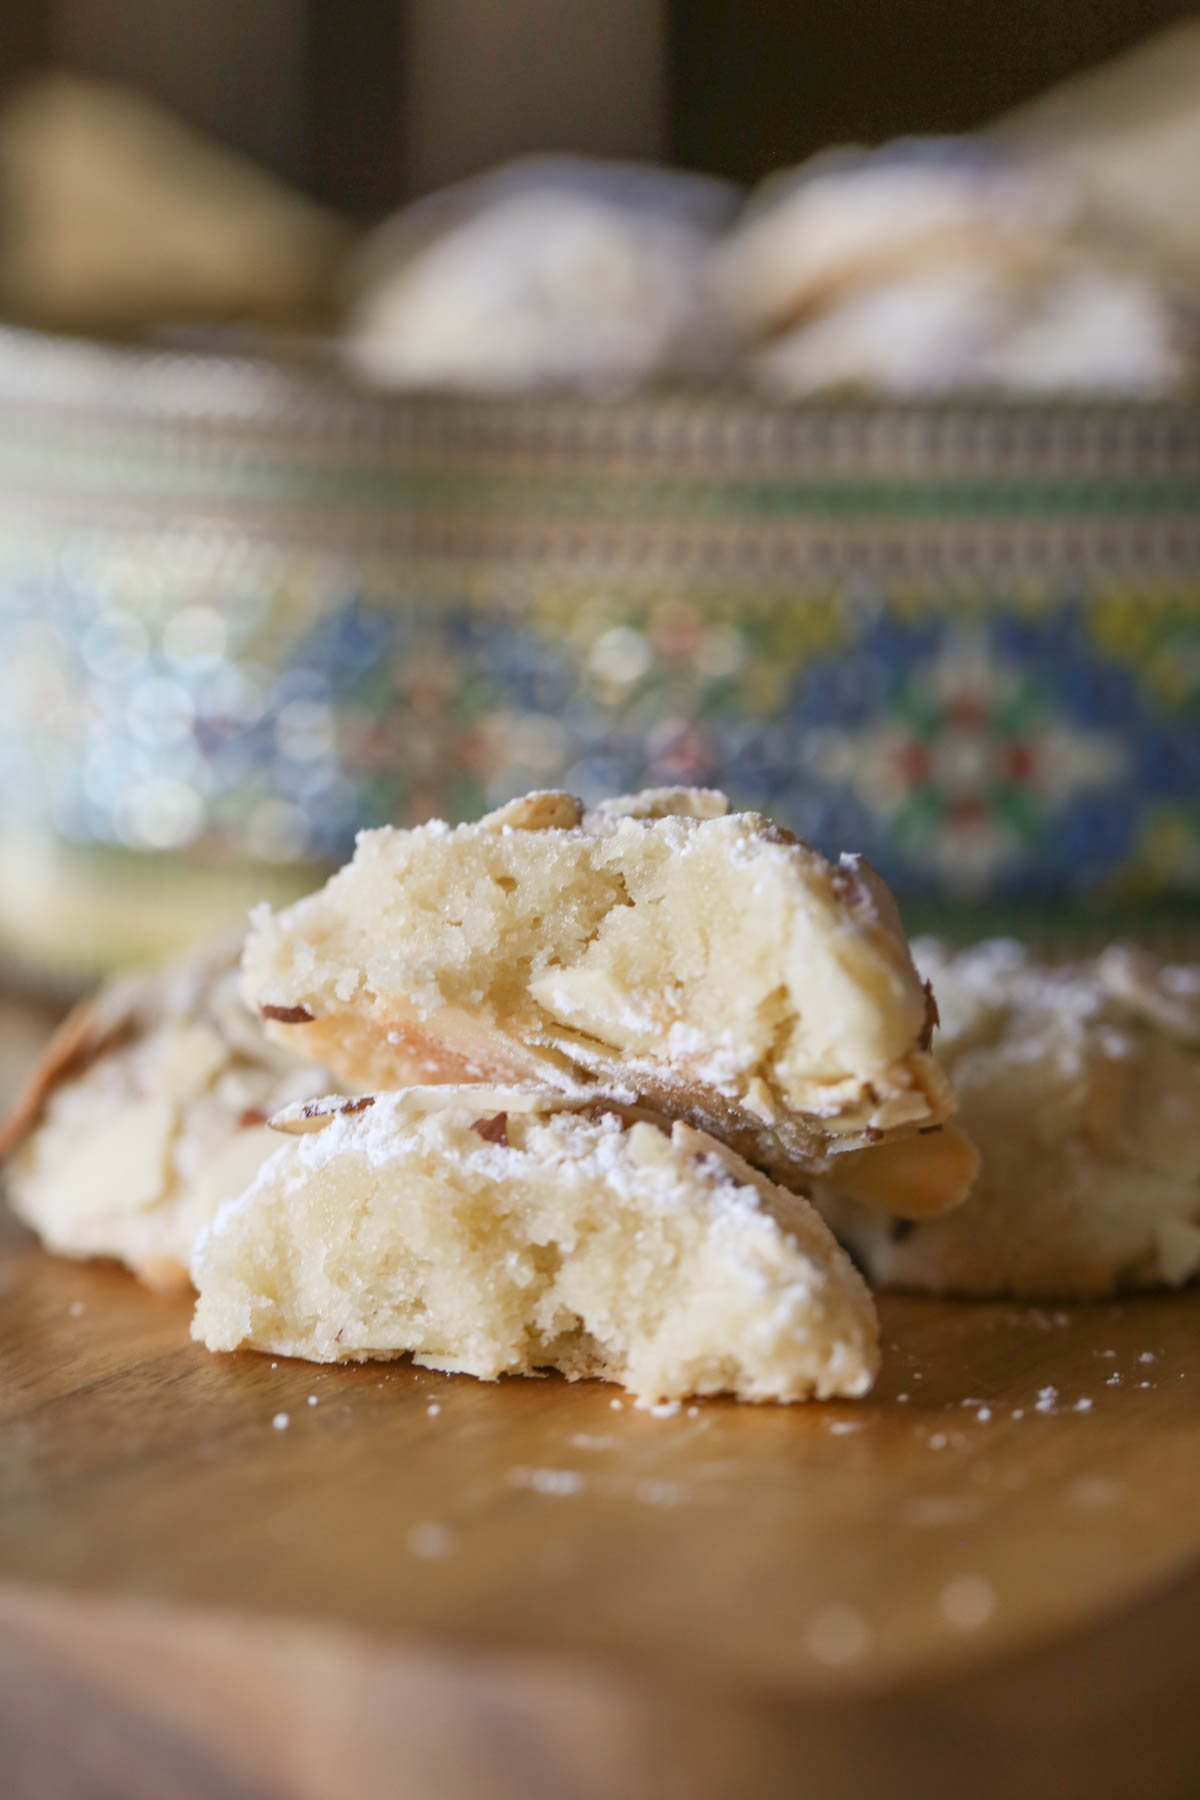 Recipe: Mix almond paste, sugar, and an egg white to make superb